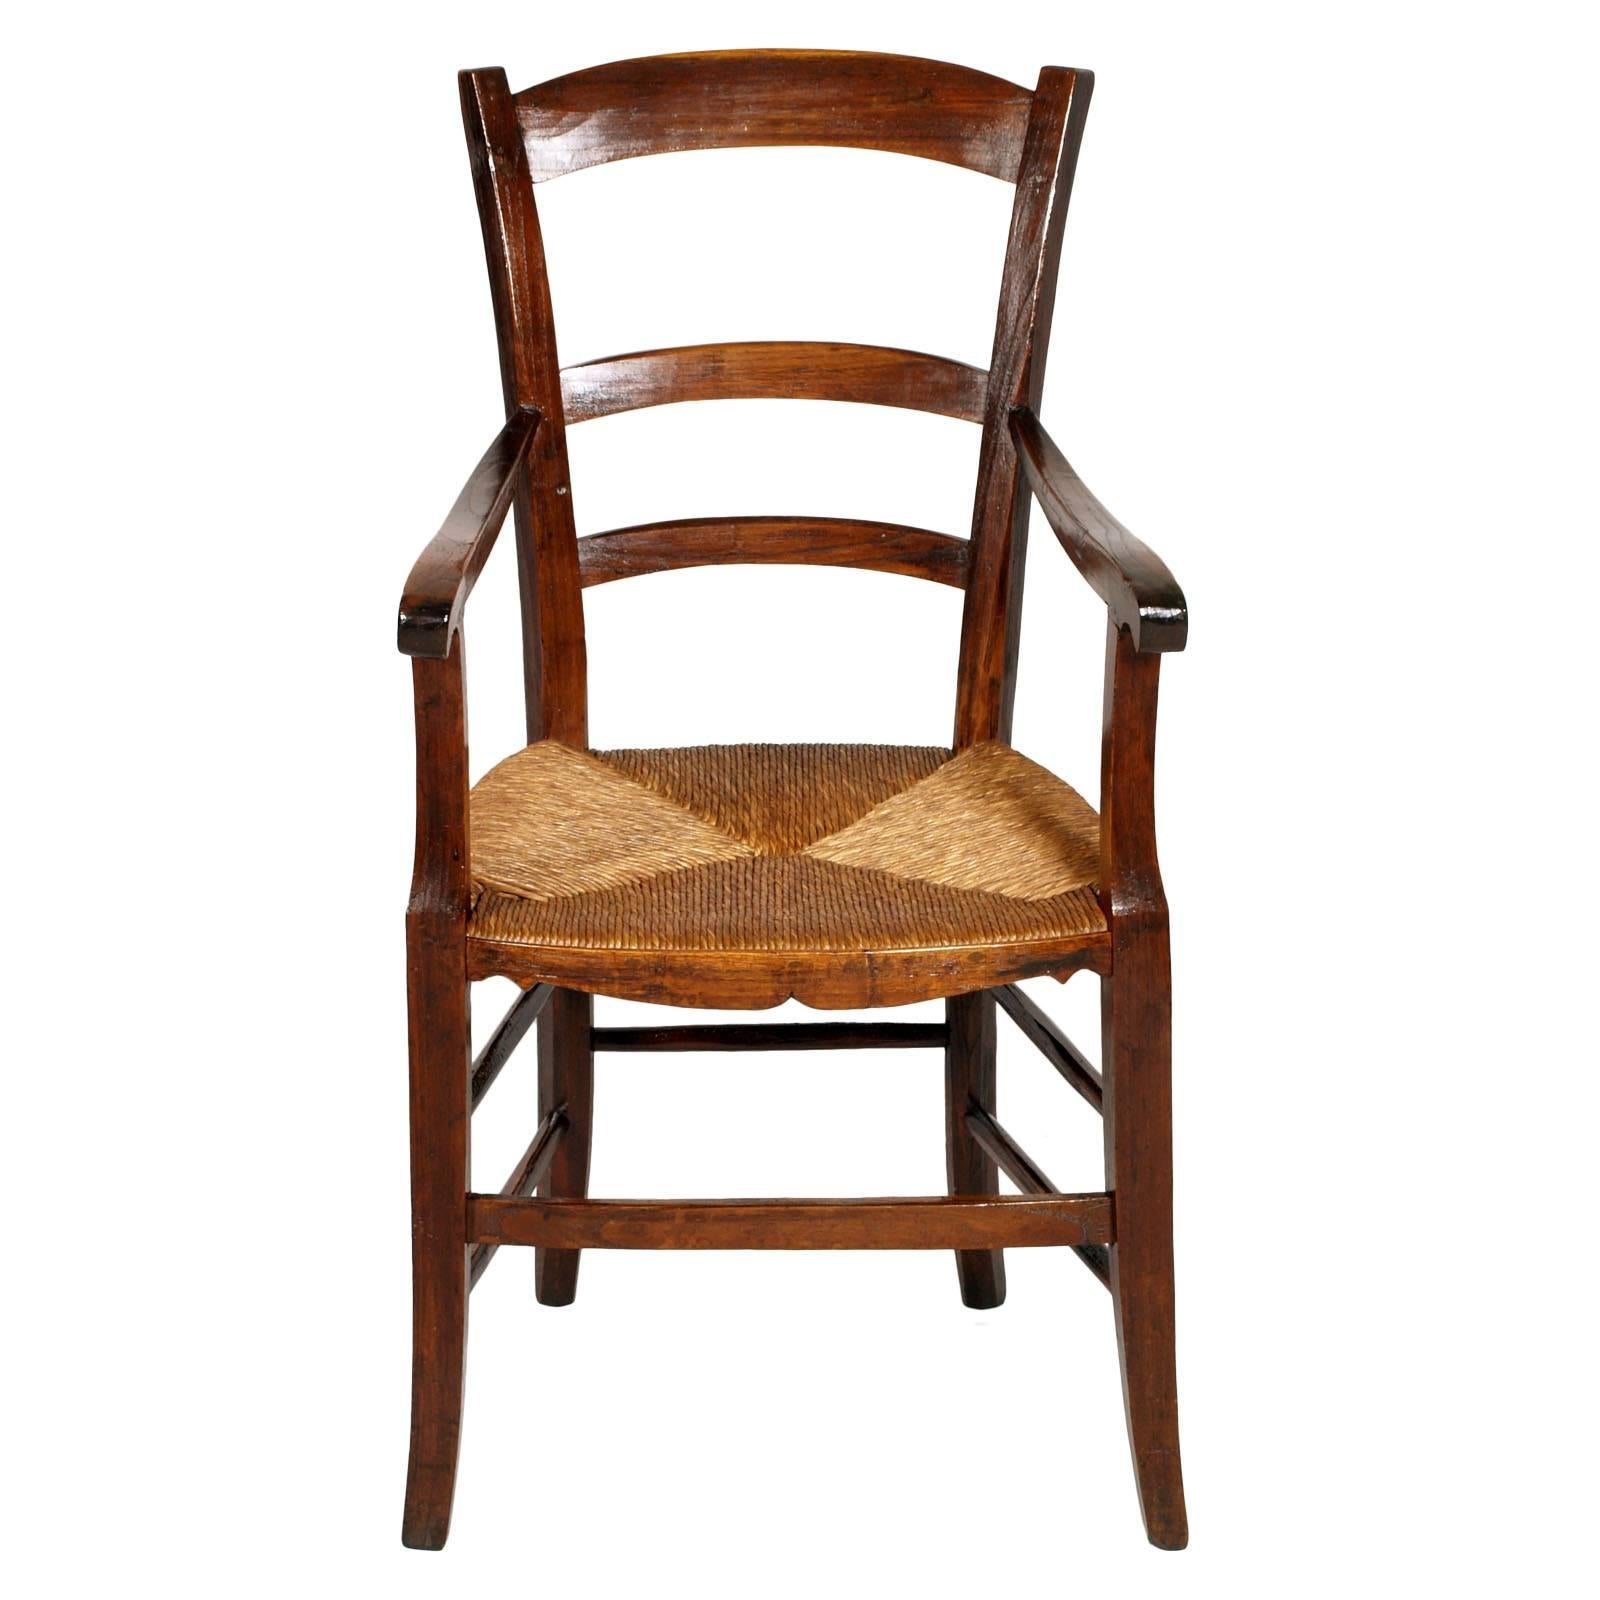 Italian 18th century country rustic robust armchair in chestnut wood hand cut, restored and polished with shellac and wax. Straw seat in excellent condition
Measures cm: H 102\48 x W 54 x D 51.